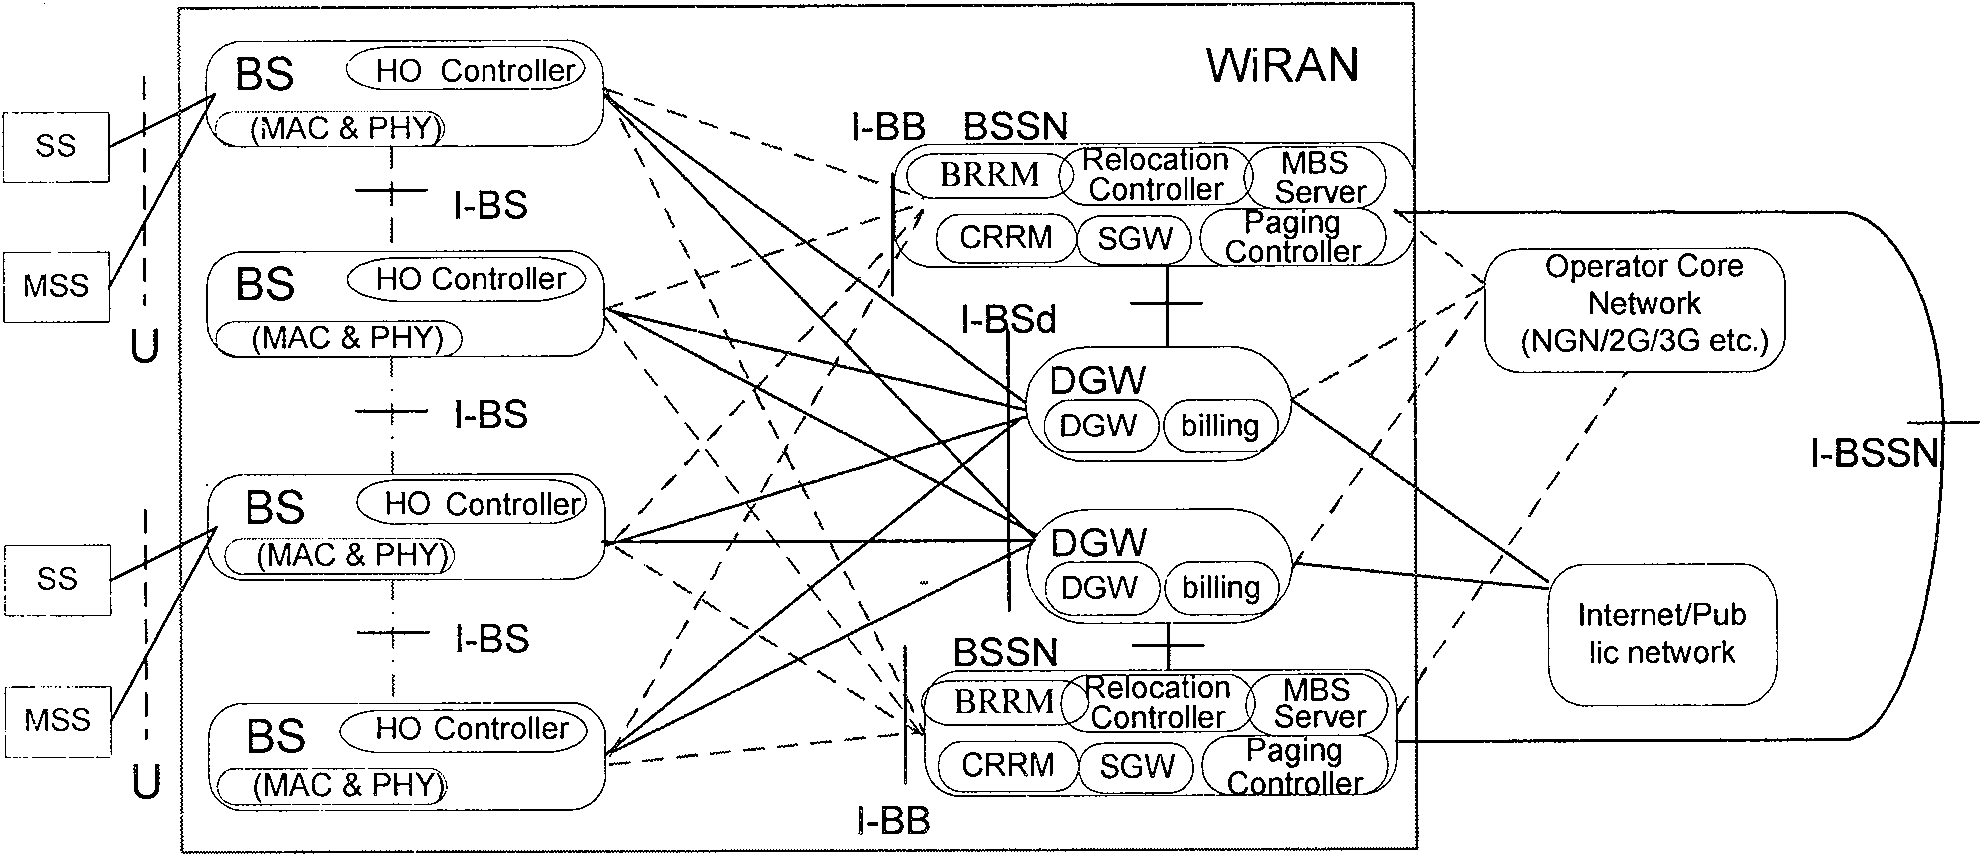 Access network of WiMAX system